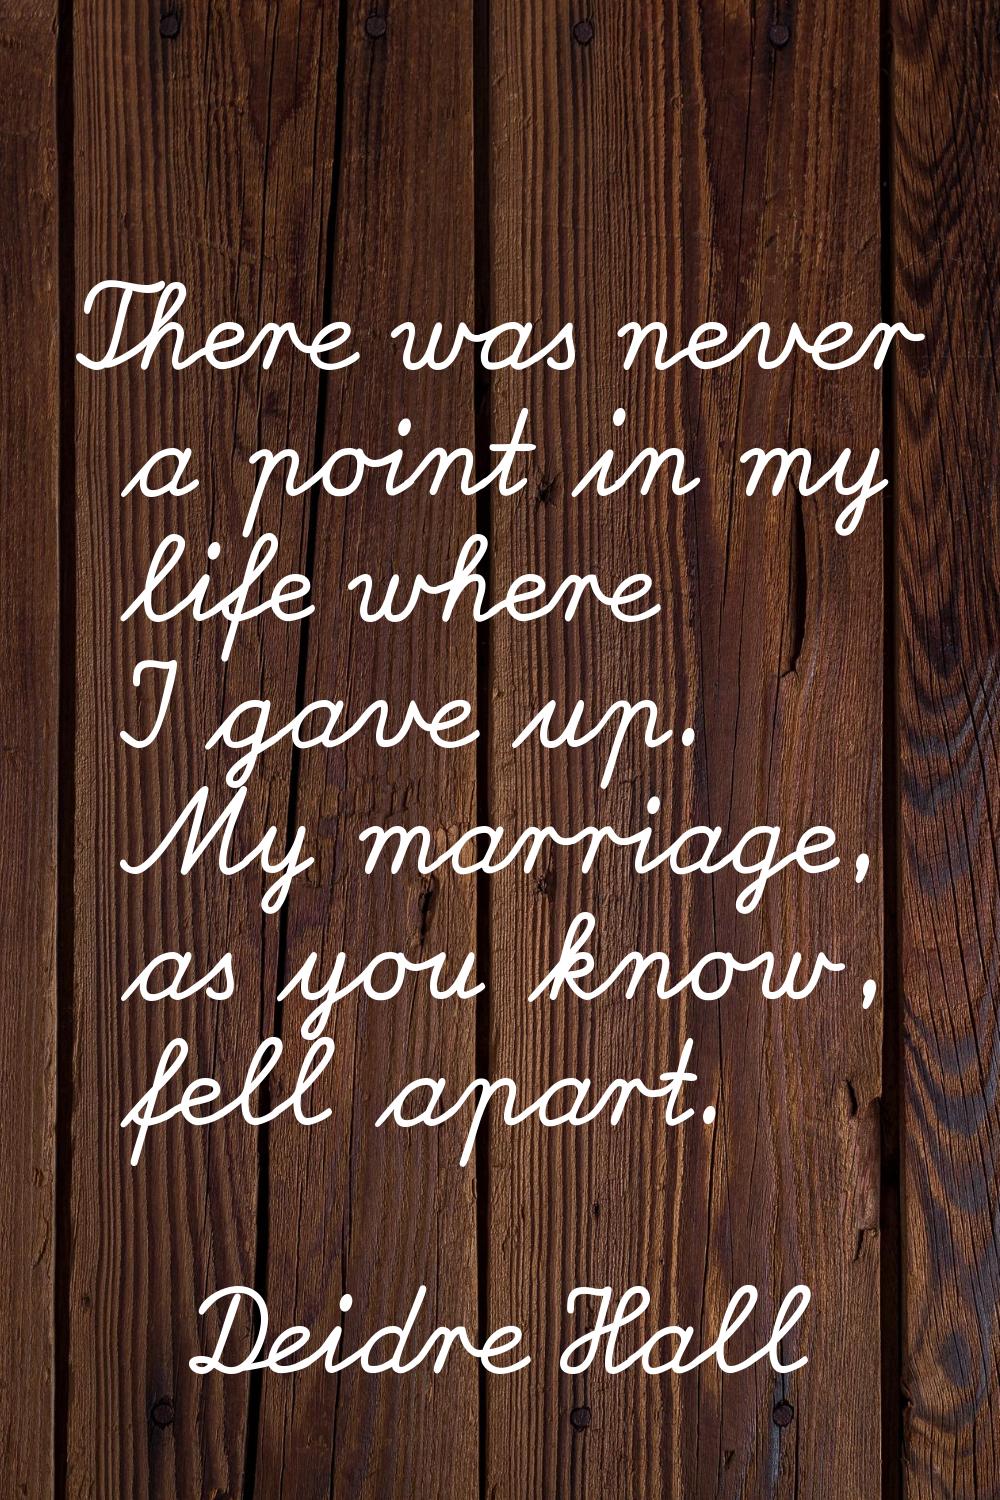 There was never a point in my life where I gave up. My marriage, as you know, fell apart.